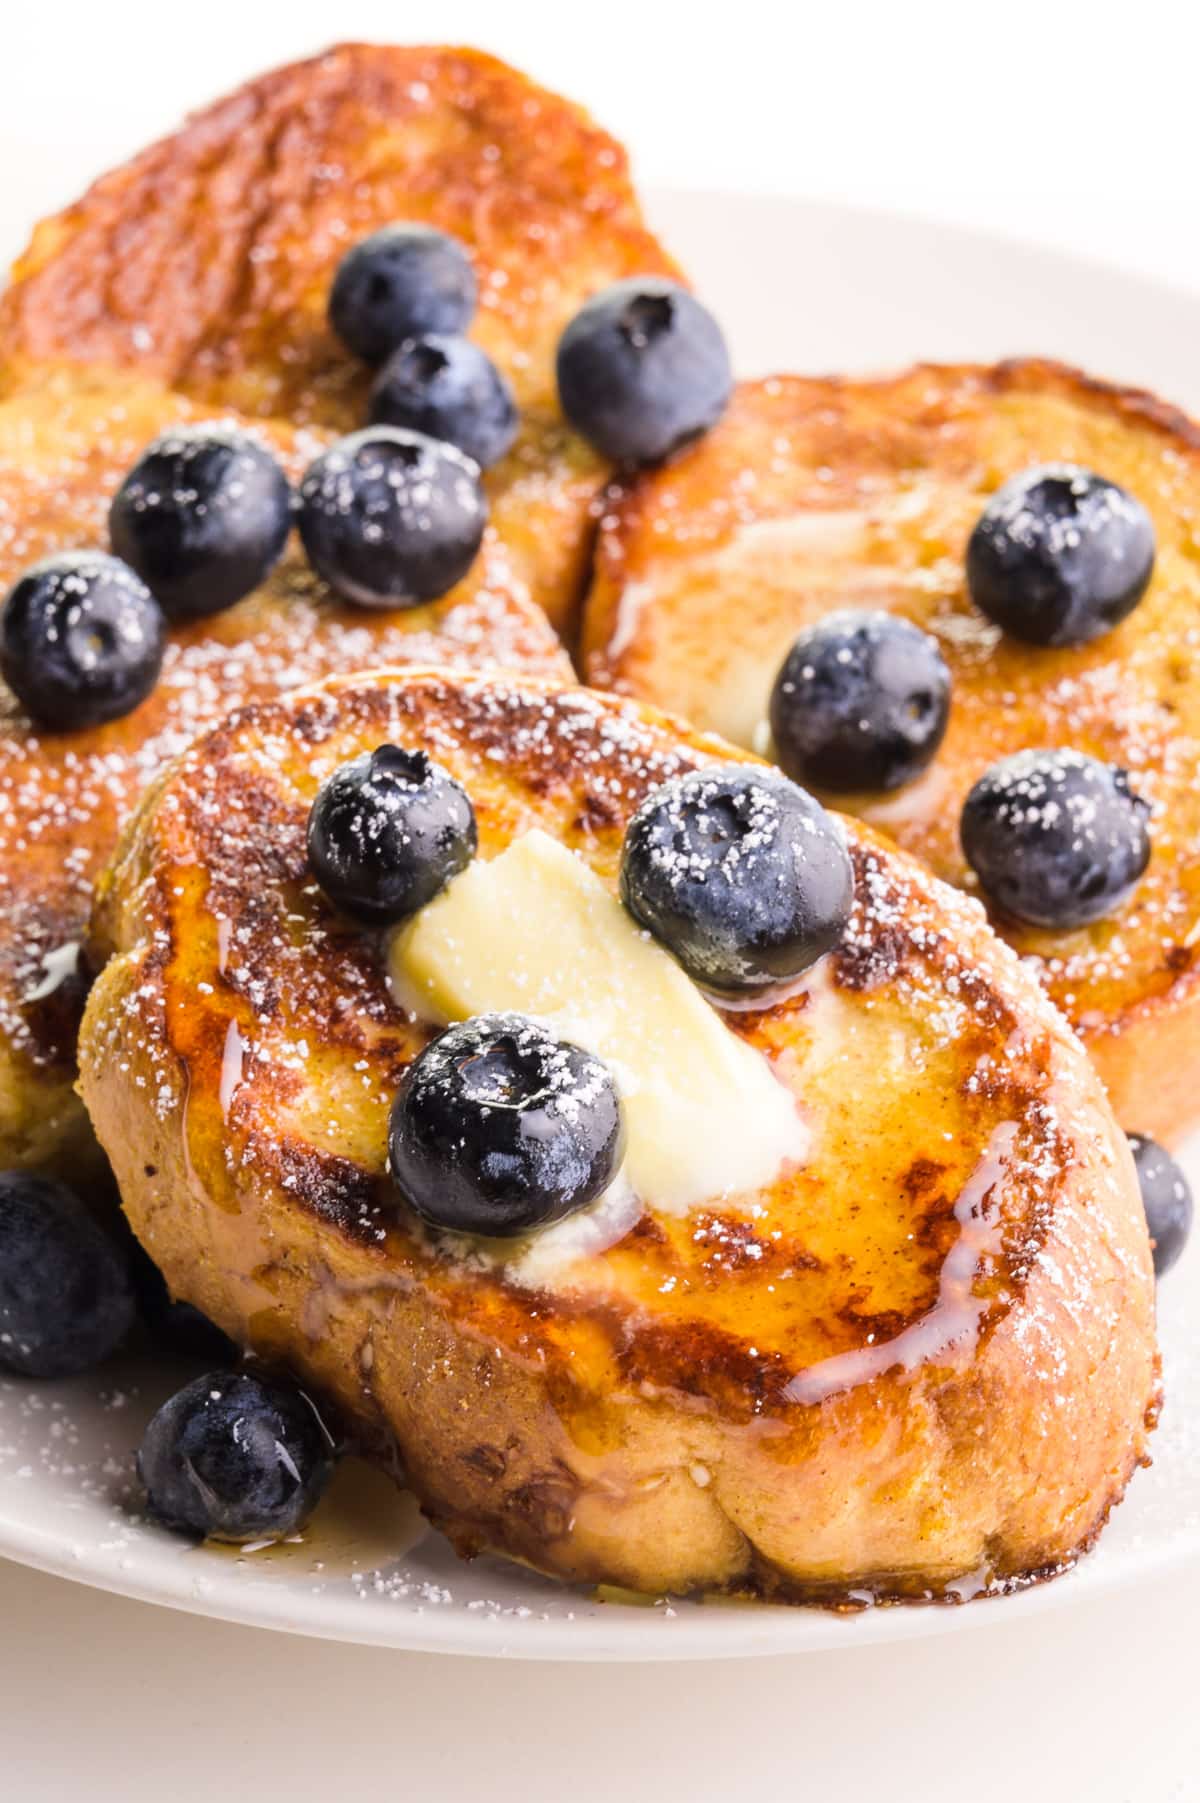 Slices of French toast topped with blueberries, butter and maple syrup.